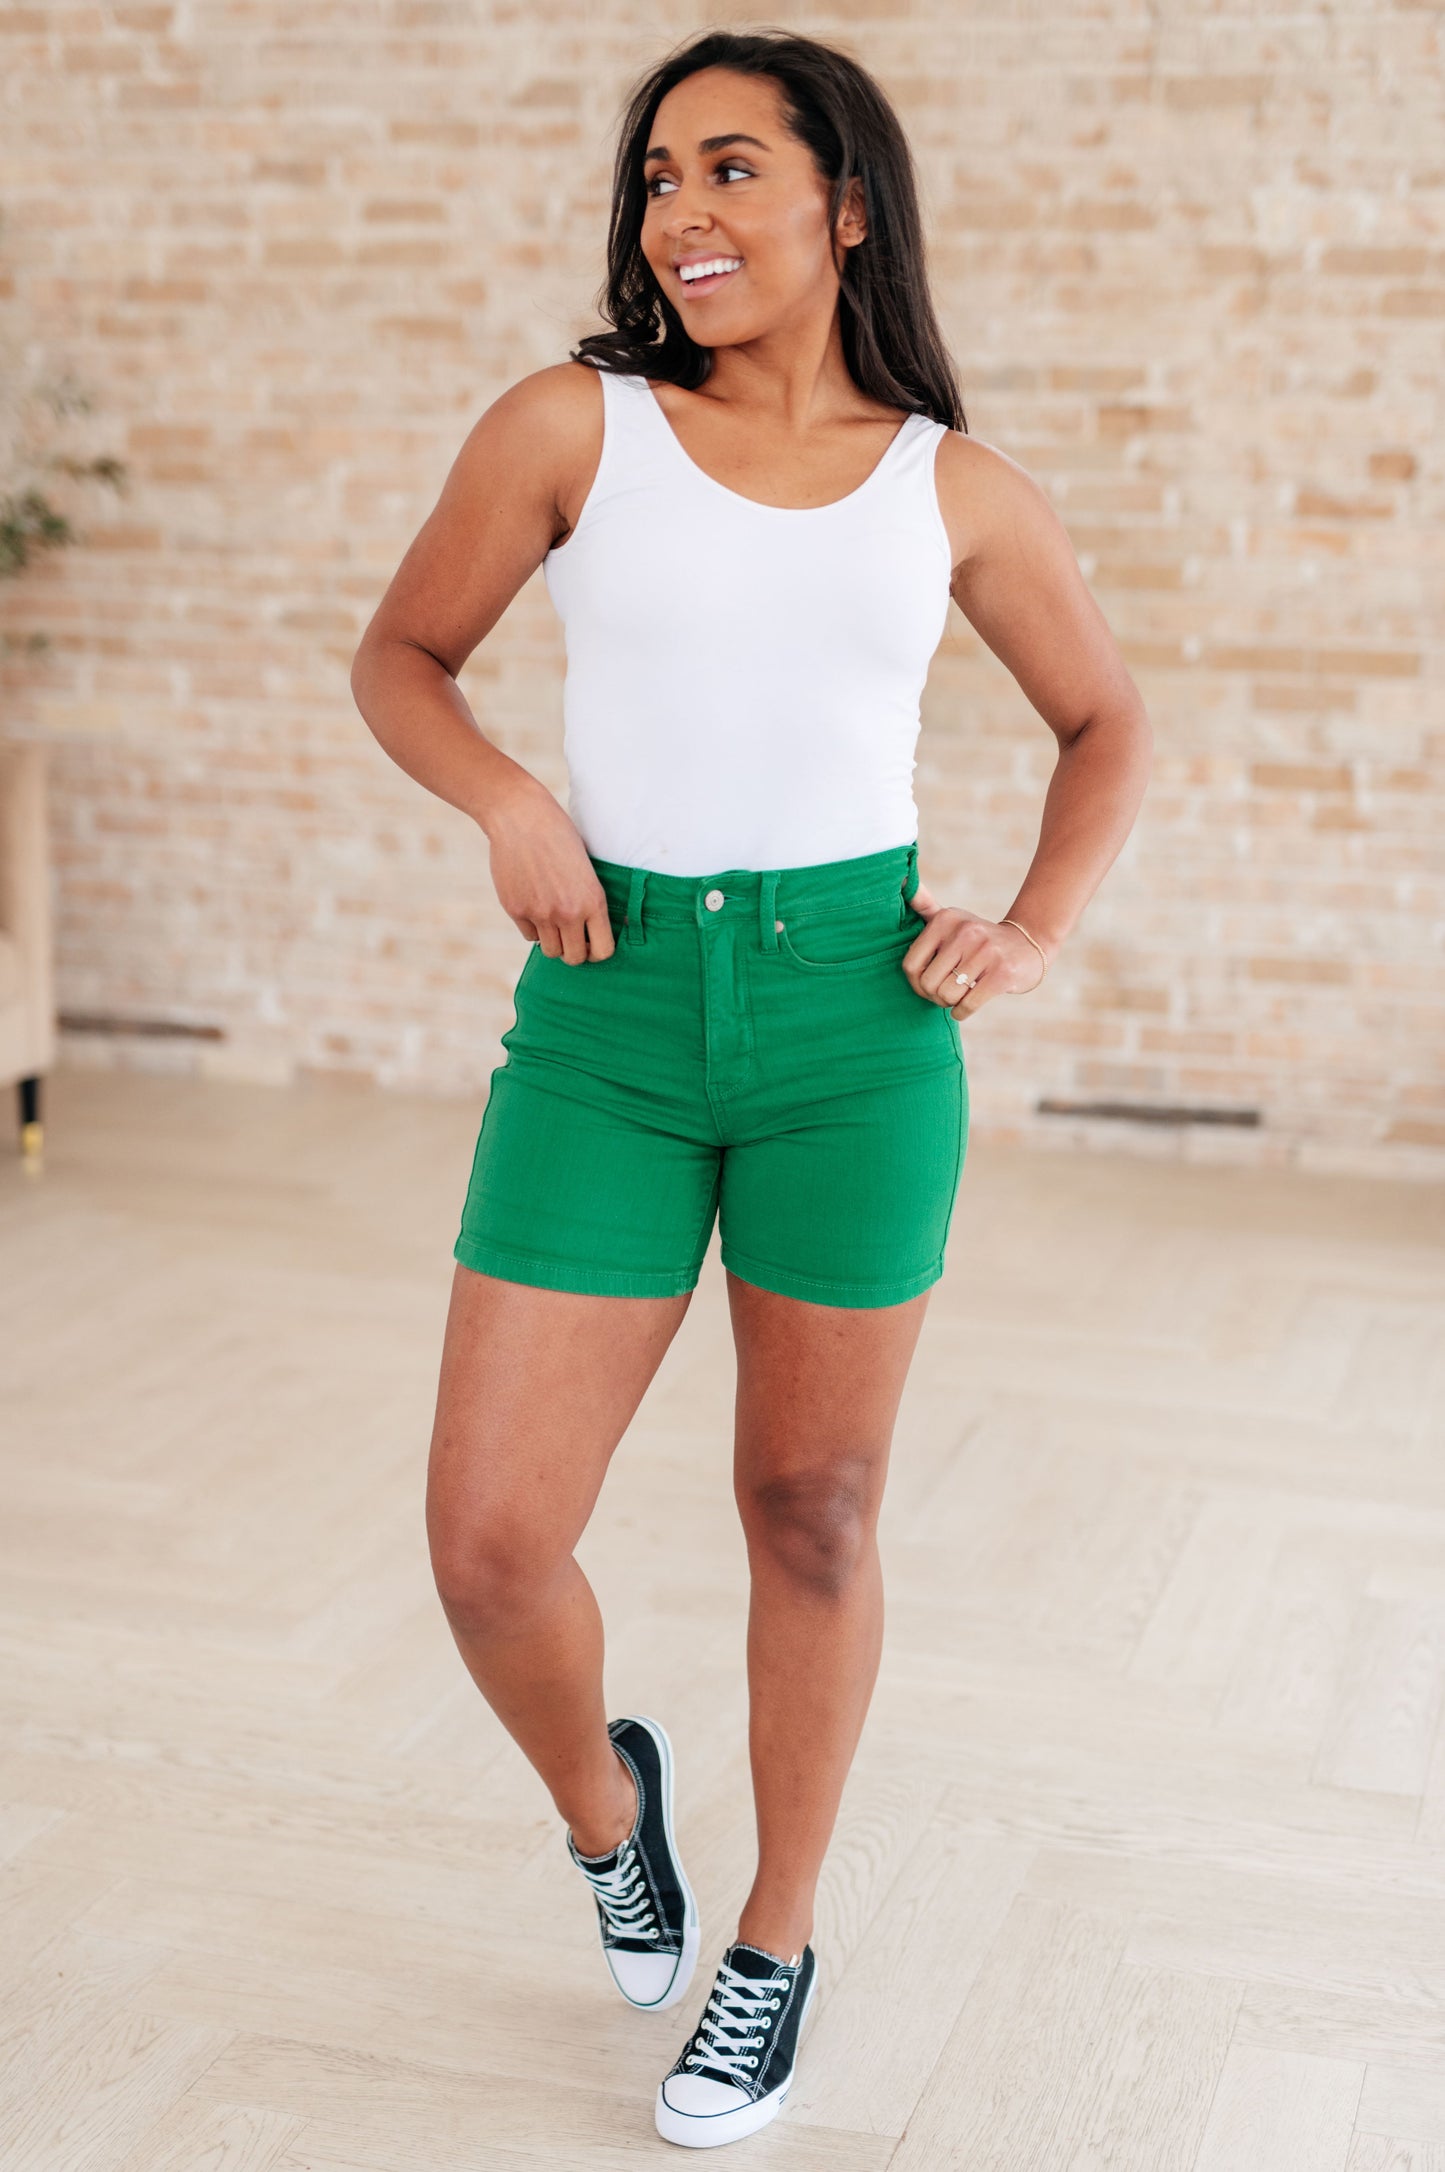 Website Exclusive Jenna Control Top Cuffed Shorts in Green